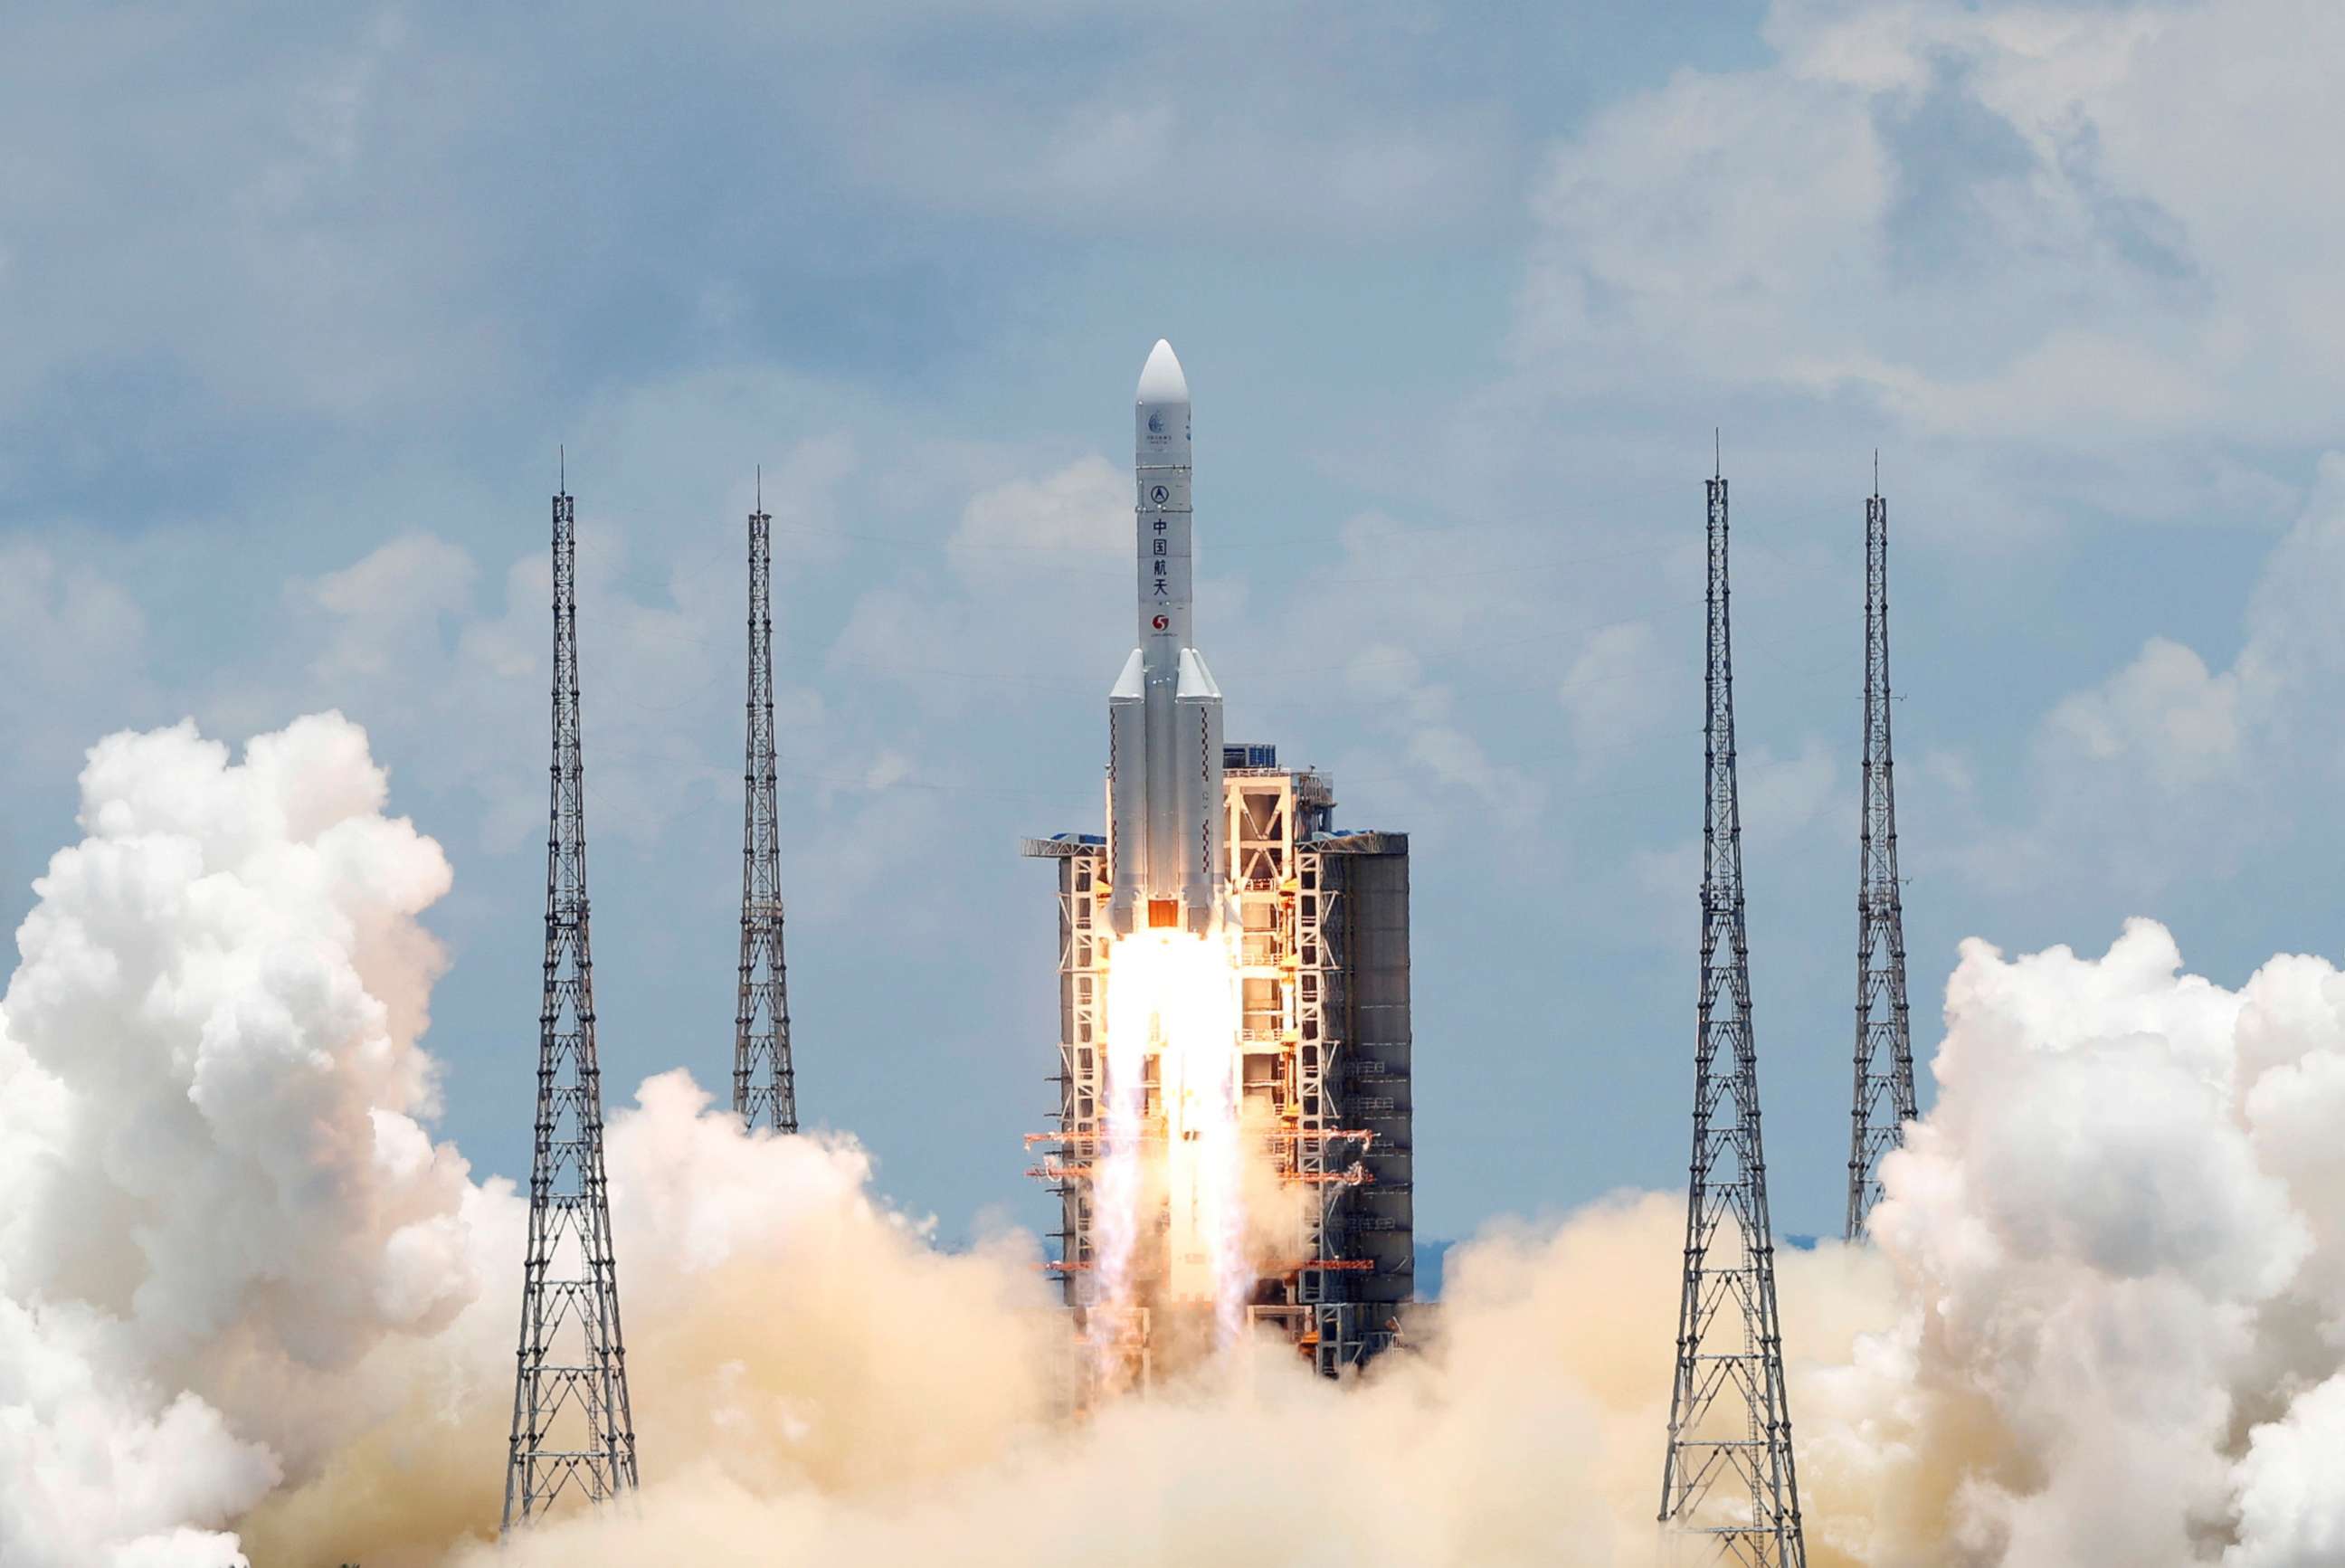 PHOTO: The Long March 5 Y-4 rocket, carrying an unmanned Mars probe of the Tianwen-1 mission, takes off from Wenchang Space Launch Center in Wenchang, Hainan Province, China, July 23, 2020.